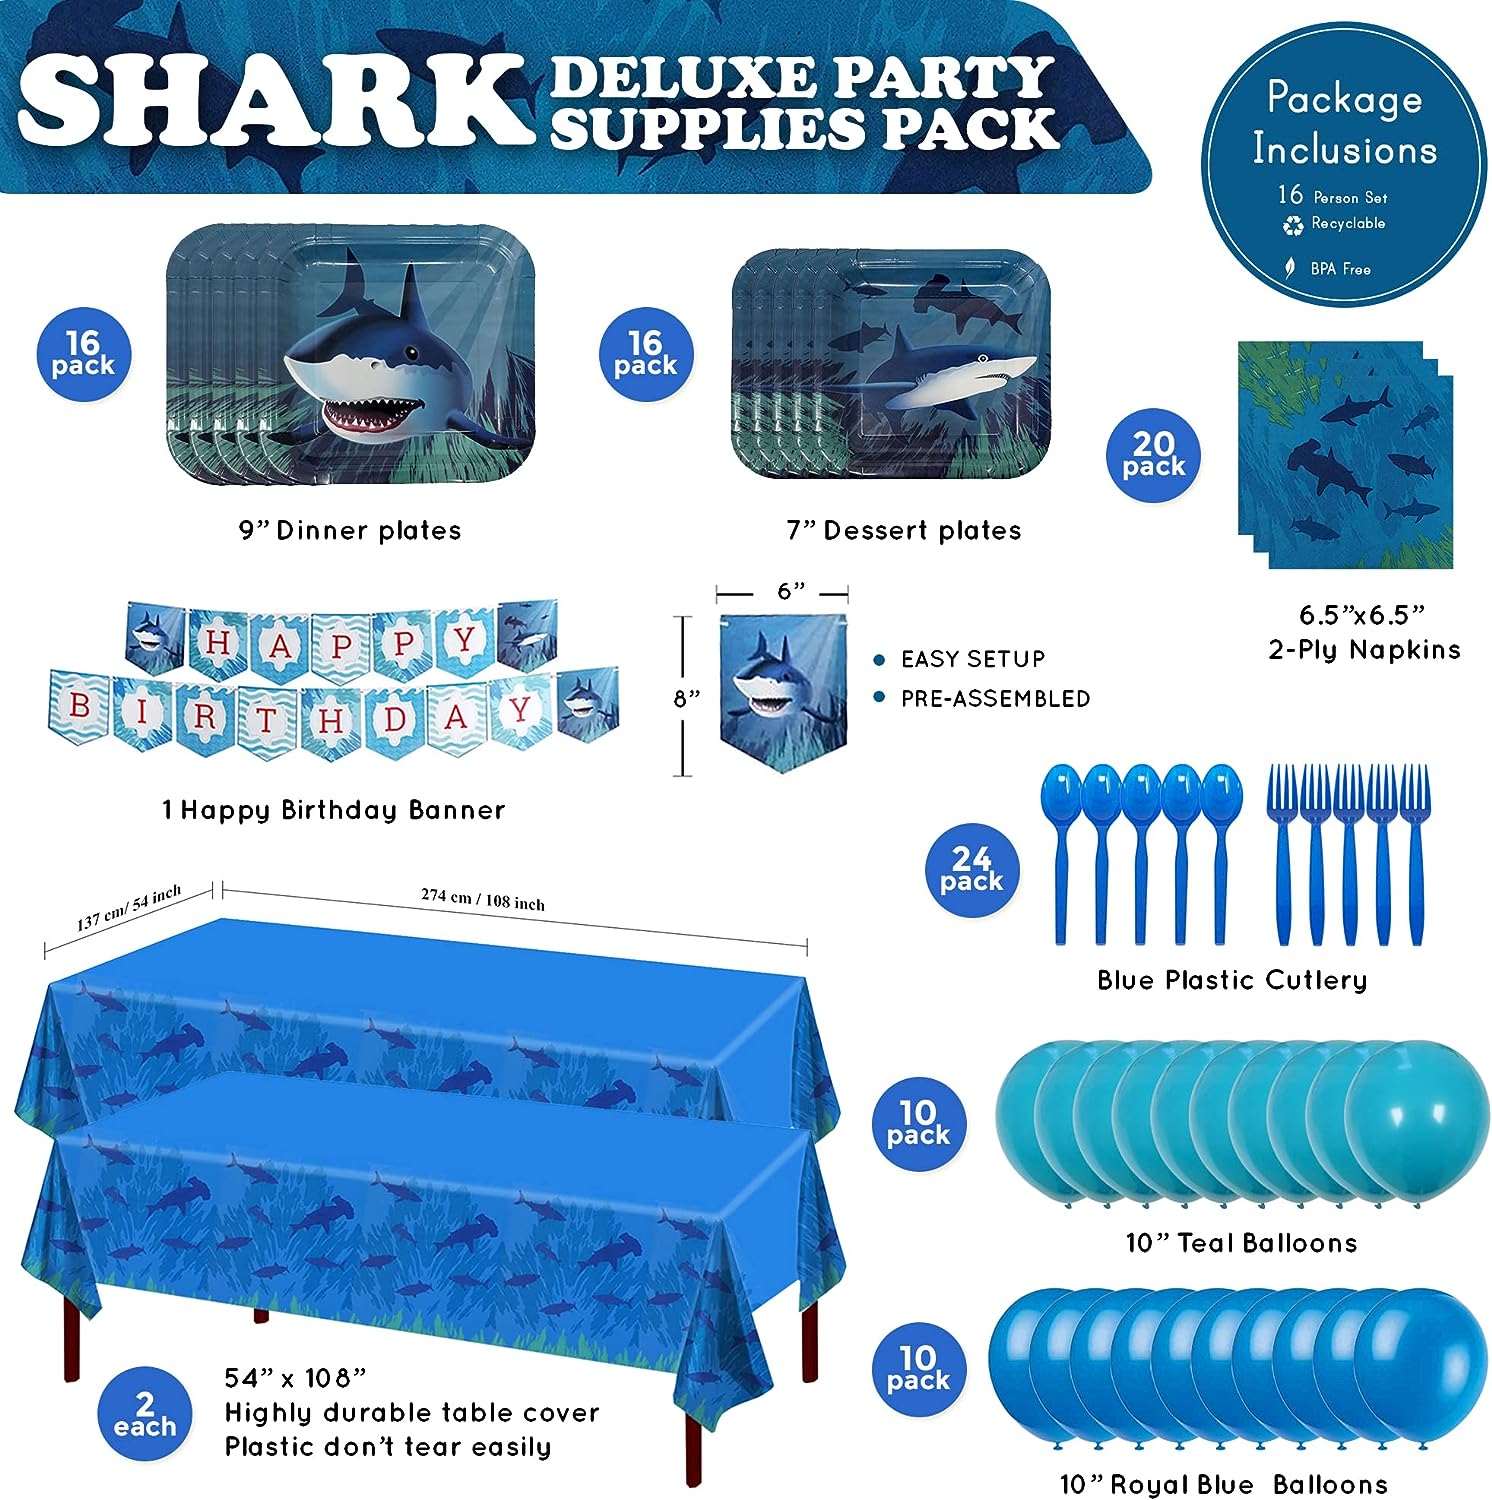 16 9-inch paper dinner plates, 16 7-inch paper dessert plates, 20 paper lunch napkins, 2 plastic table covers, 1 banner, 10 royal blue balloons, 10 Teal balloons, 24 blue plastic forks, and 24 blue plastic plastic spoons